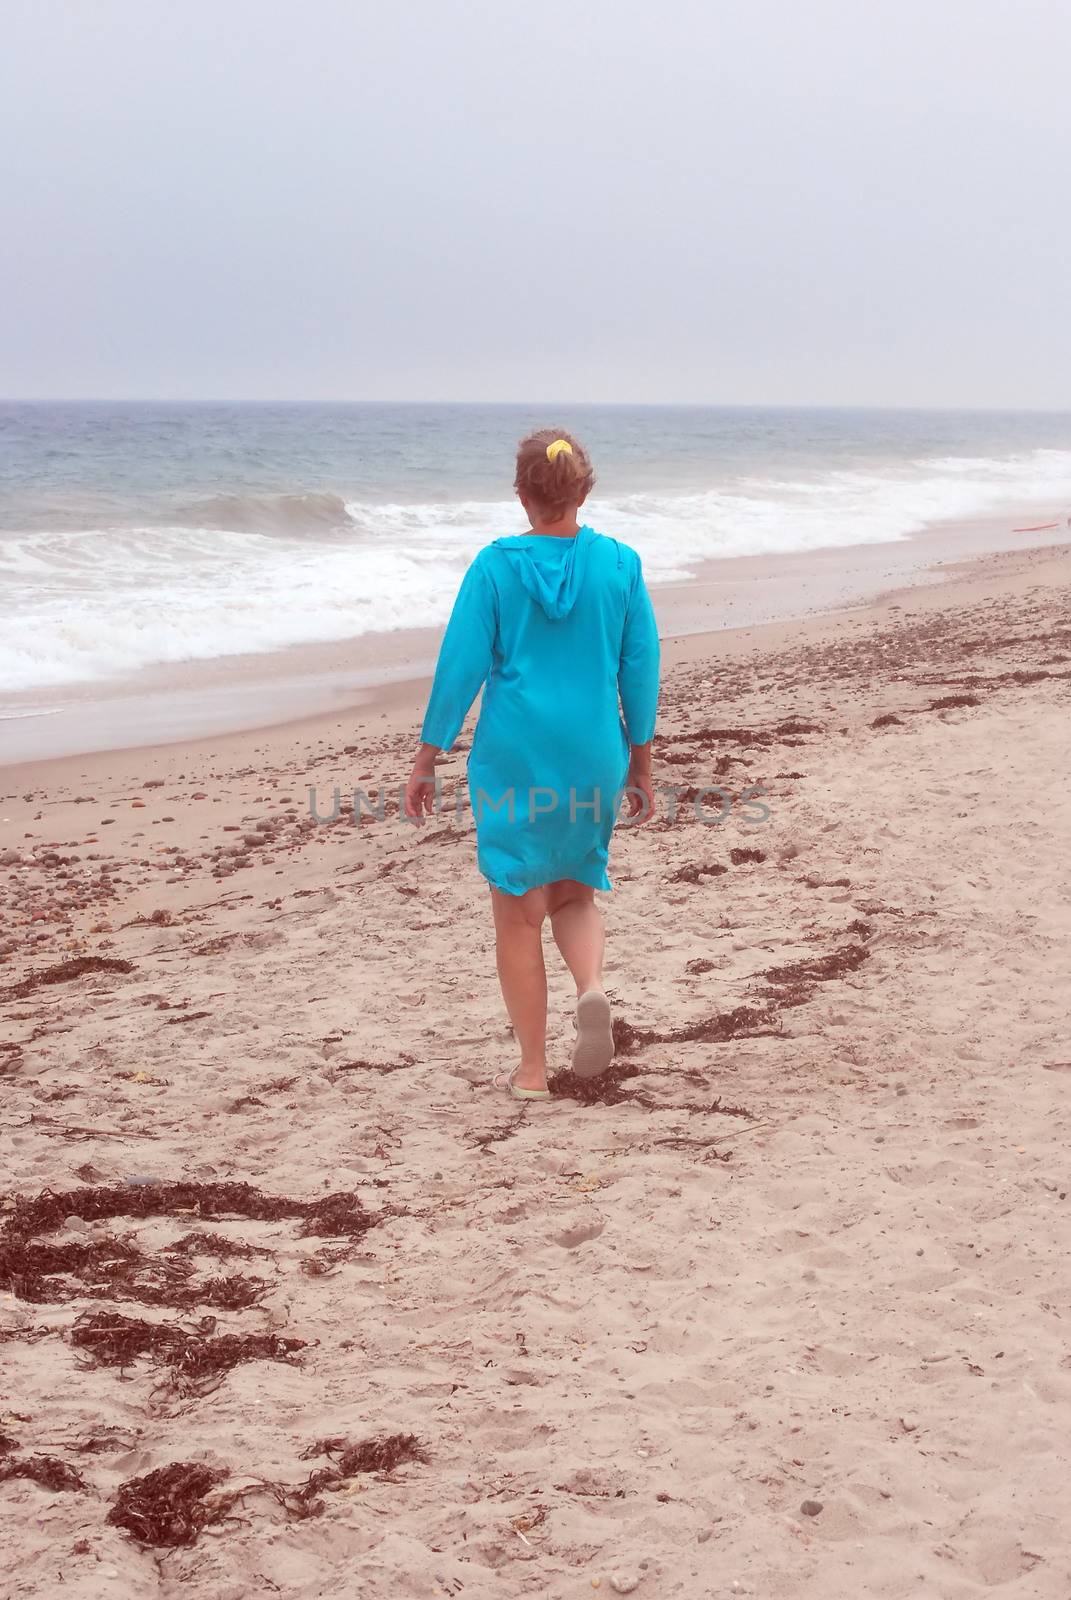 Mature female beauty walking in the sand on the beach outside.